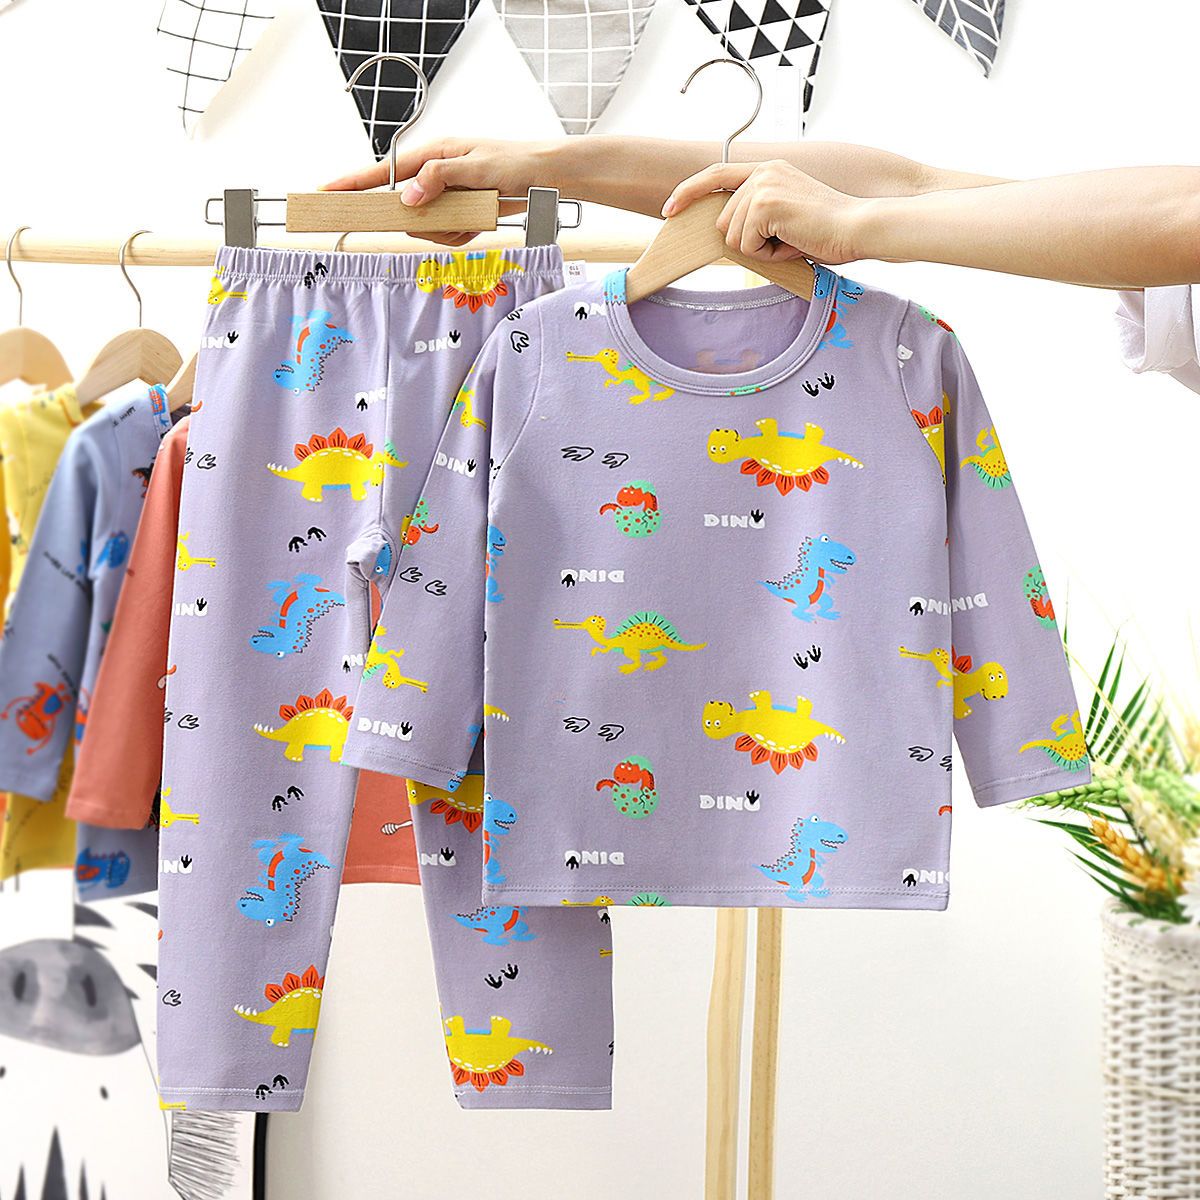 Children's Lycra Cotton Underwear Set Boys and Girls Spring and Autumn Baby Long Clothes and Long Trousers Small, Medium and Big Children's Homewear Pajamas